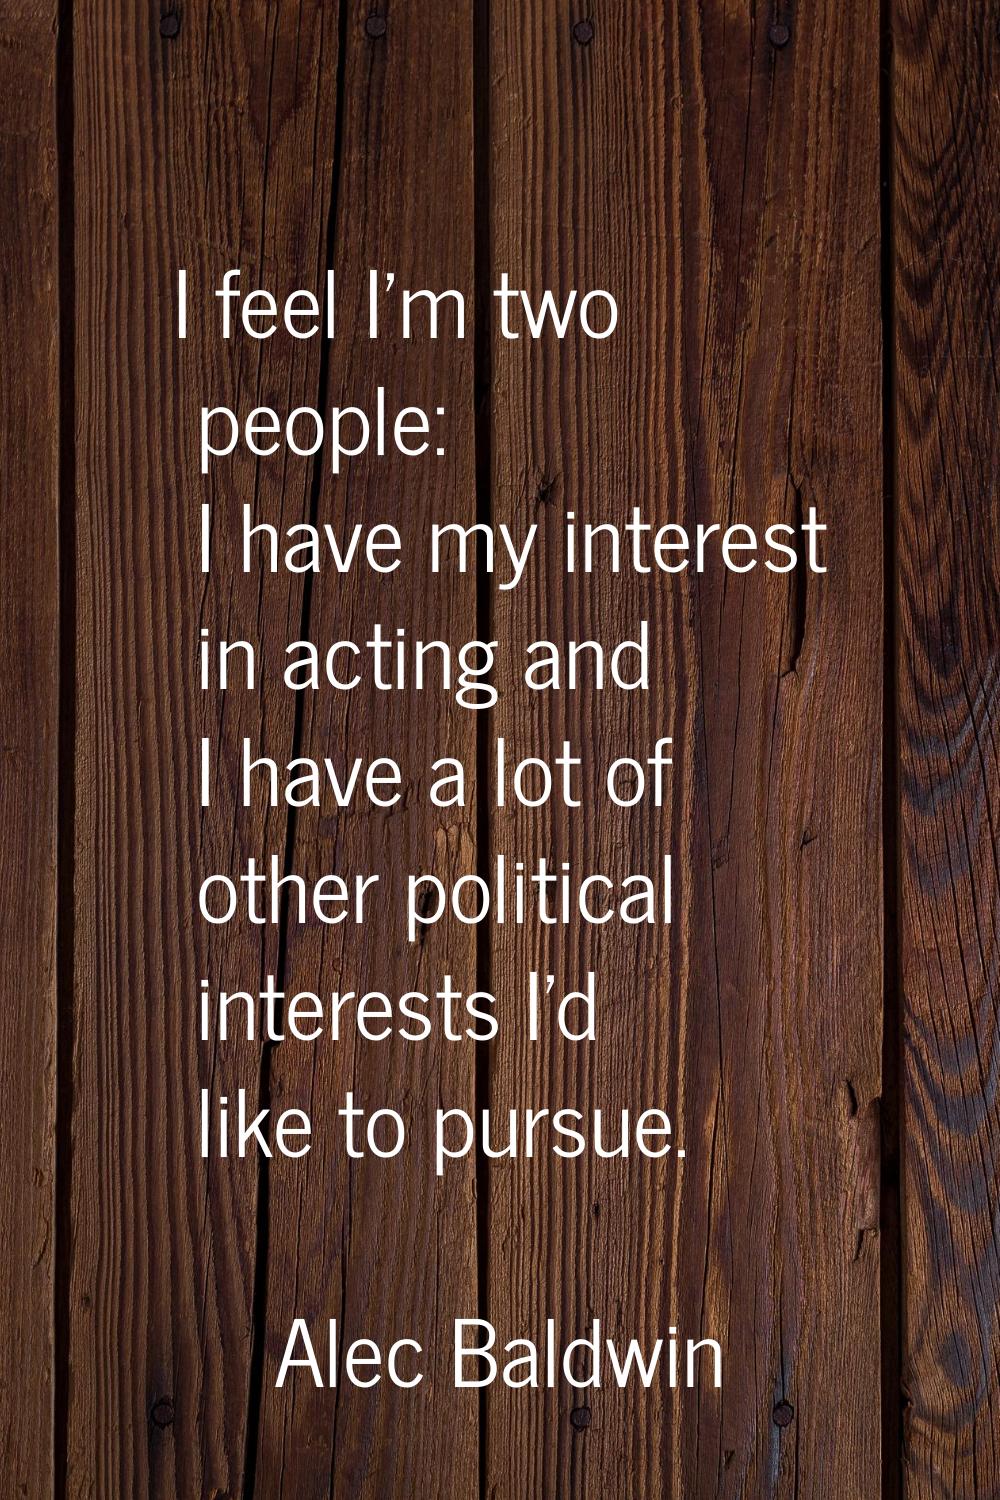 I feel I'm two people: I have my interest in acting and I have a lot of other political interests I